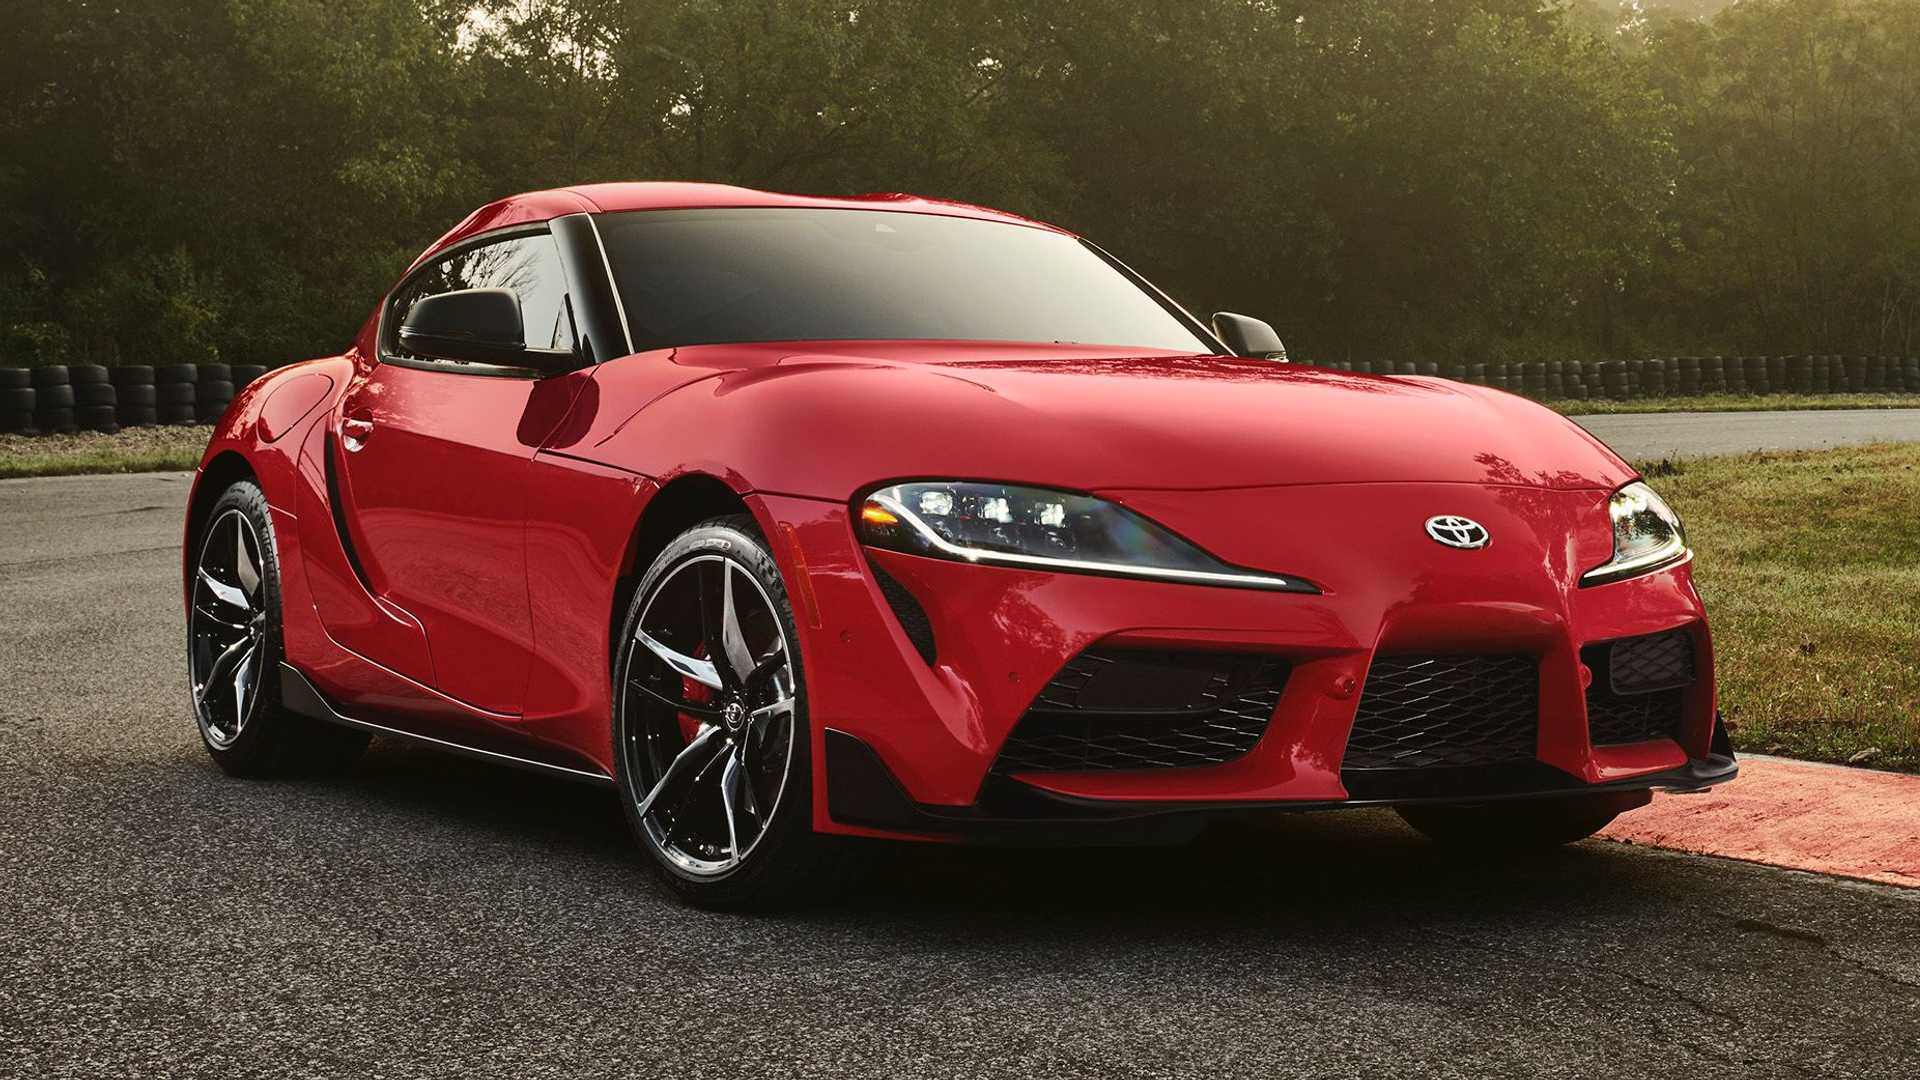 Toyota Supra New Lease Deal Limits Driving To Only 000 Miles A Year